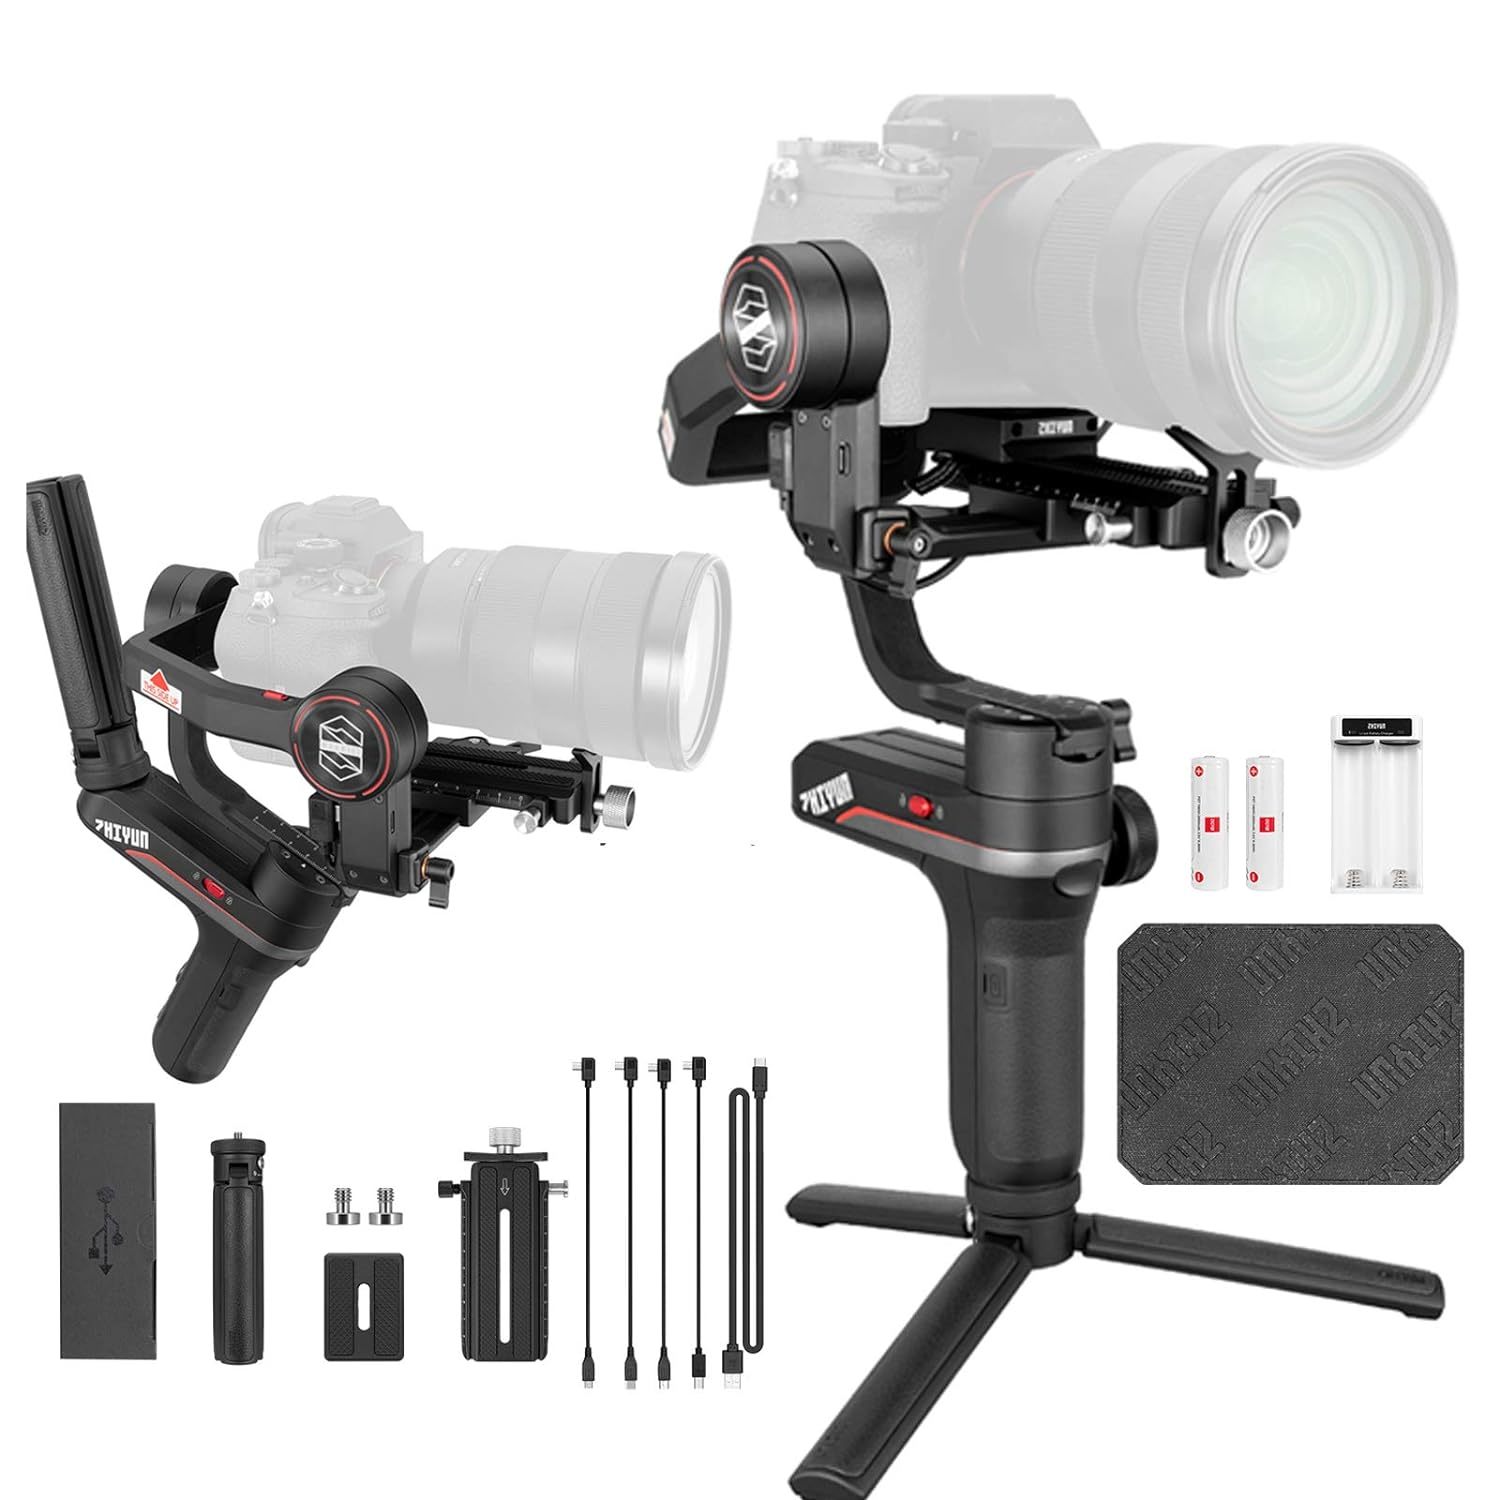 Weebill S Gimbal Stabilizer For Mirrorless And Dslr Camera,For Canon 5Div 5Diii  - $517.99